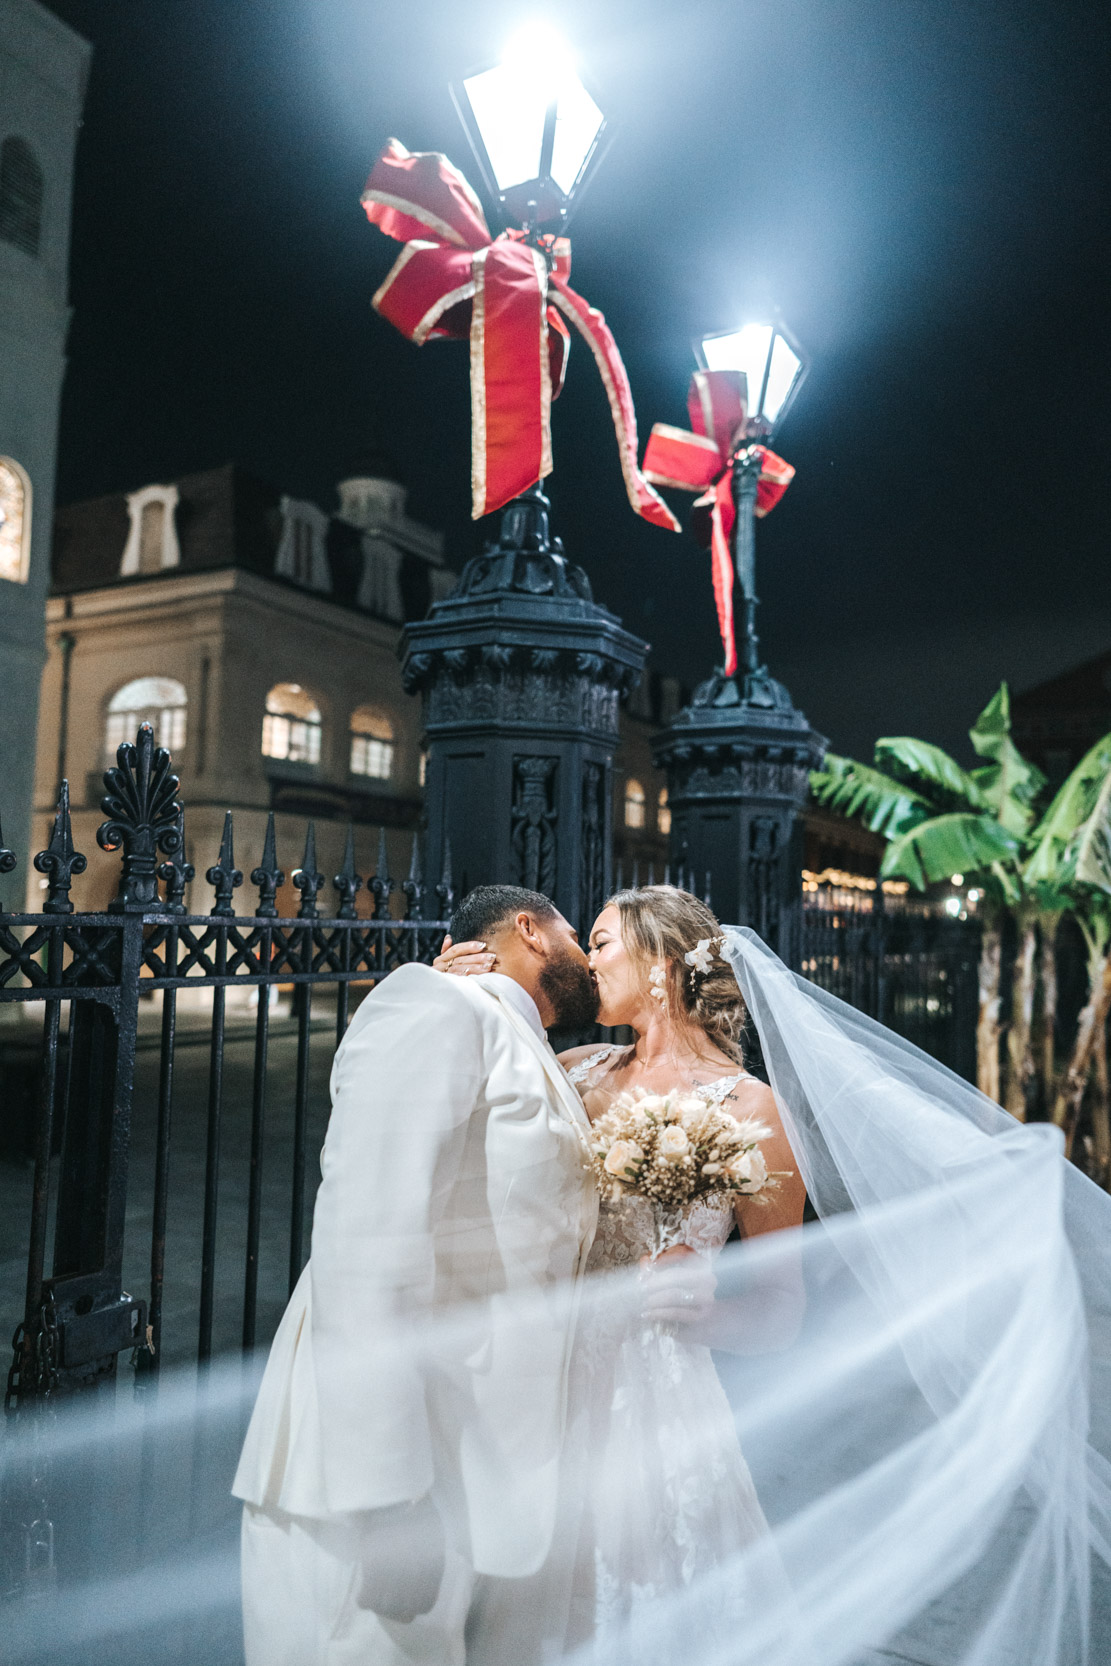 Bridal veil flying in the air and kissing groom at Jackson Square in New Orleans